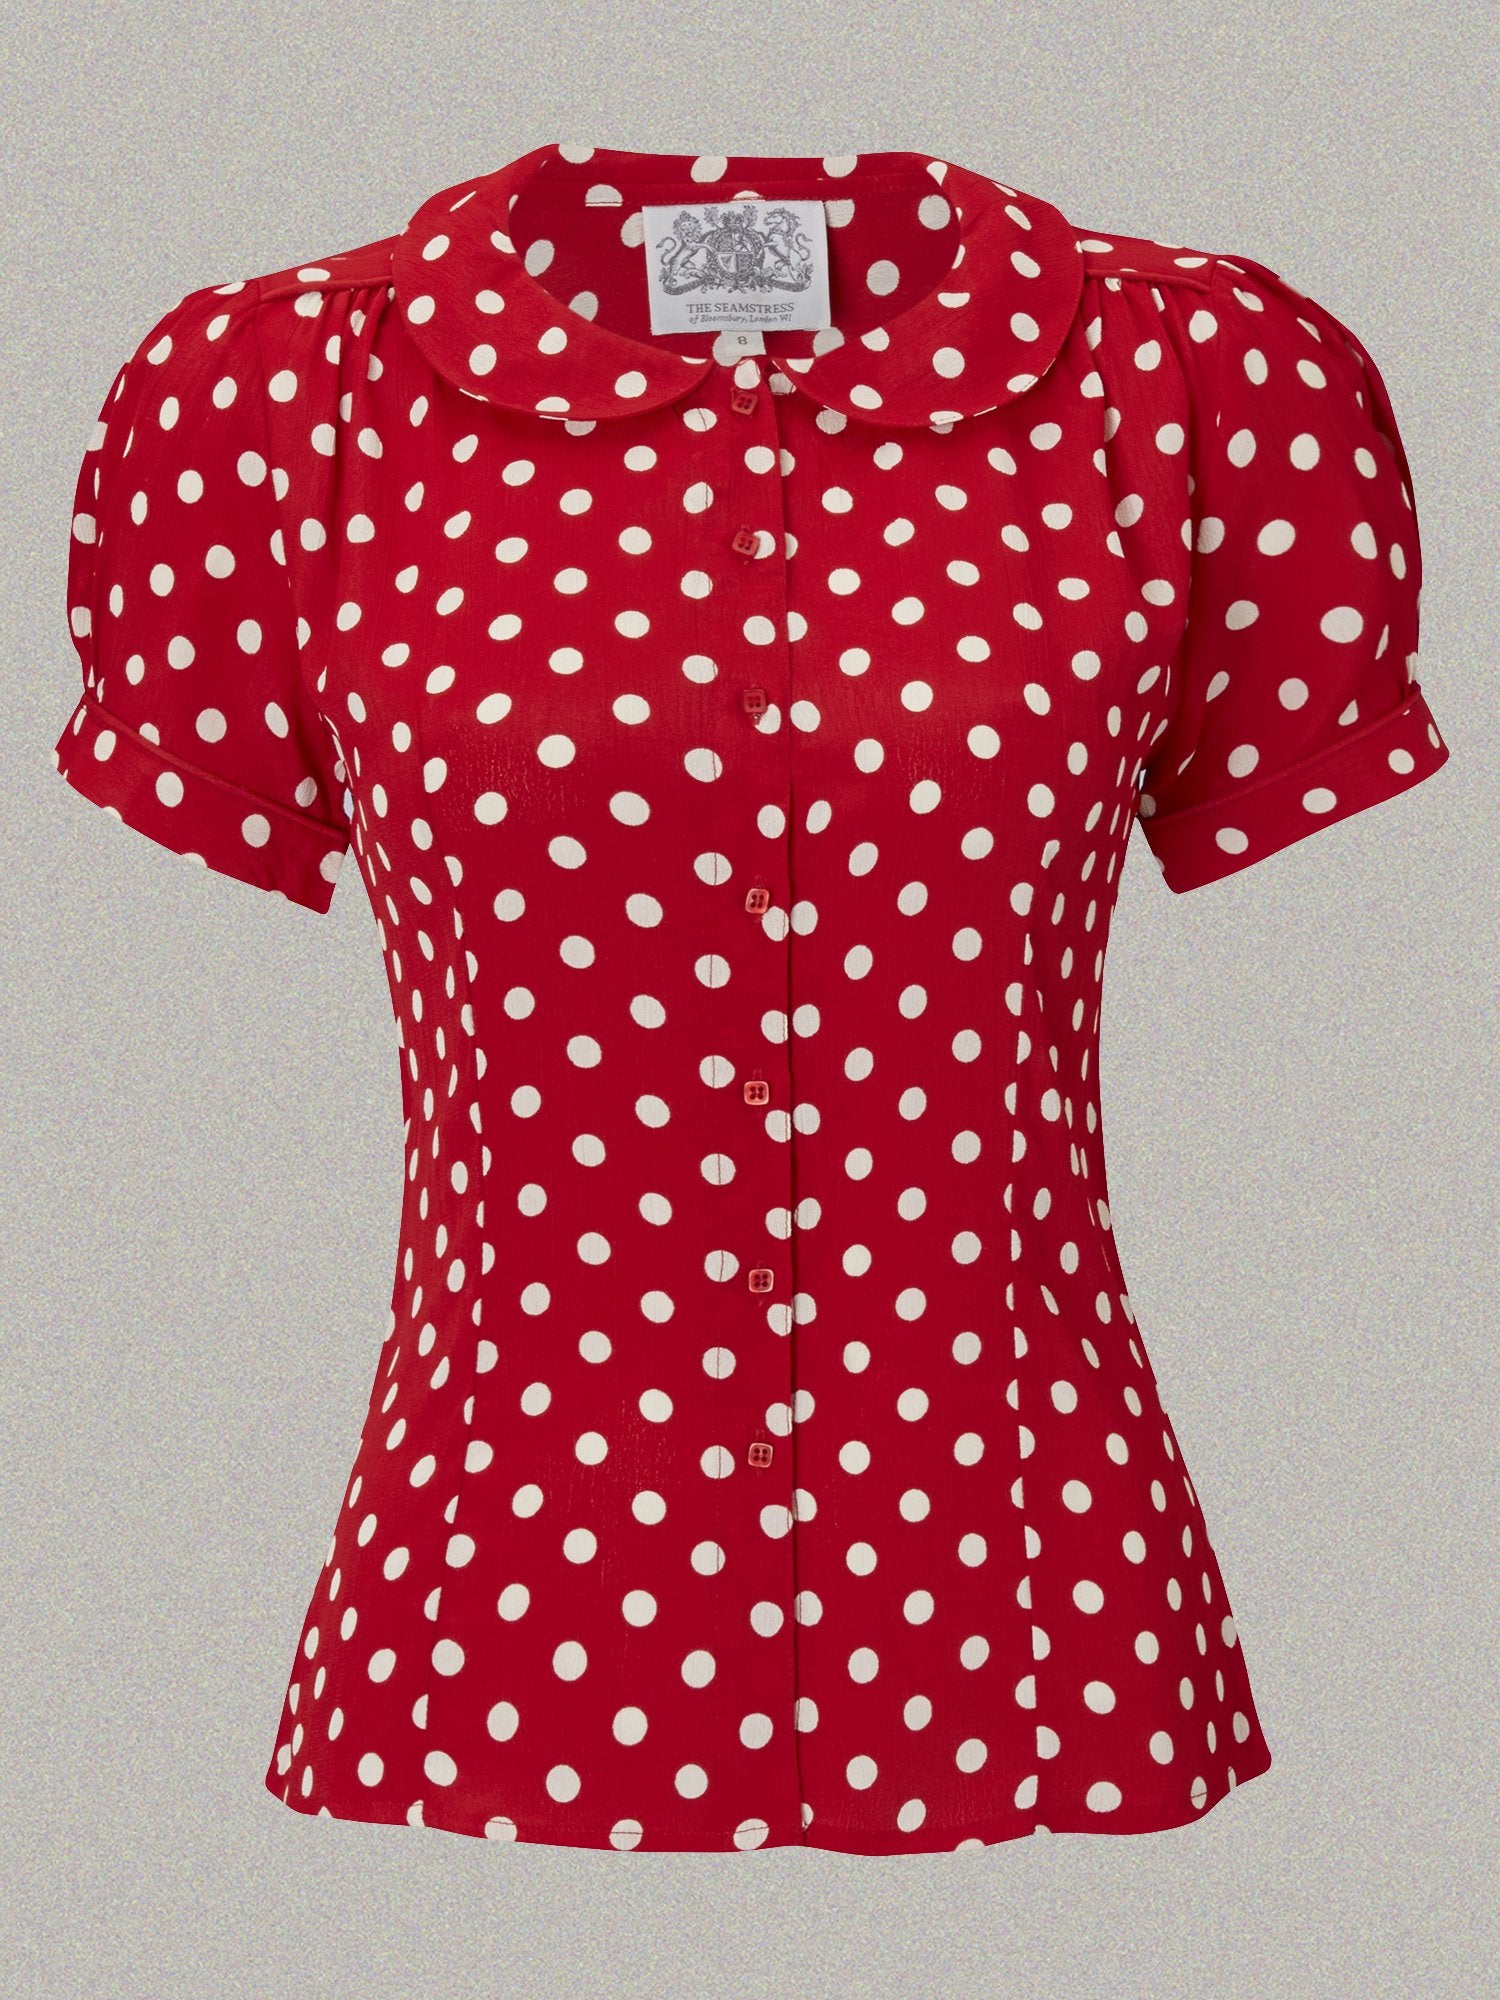 Vintage Blouses, Tops & Retro Shirts Jive Short Sleeve Blouse in Red with Polka Dot Spot Classic 1940s Vintage Style £39.95 AT vintagedancer.com